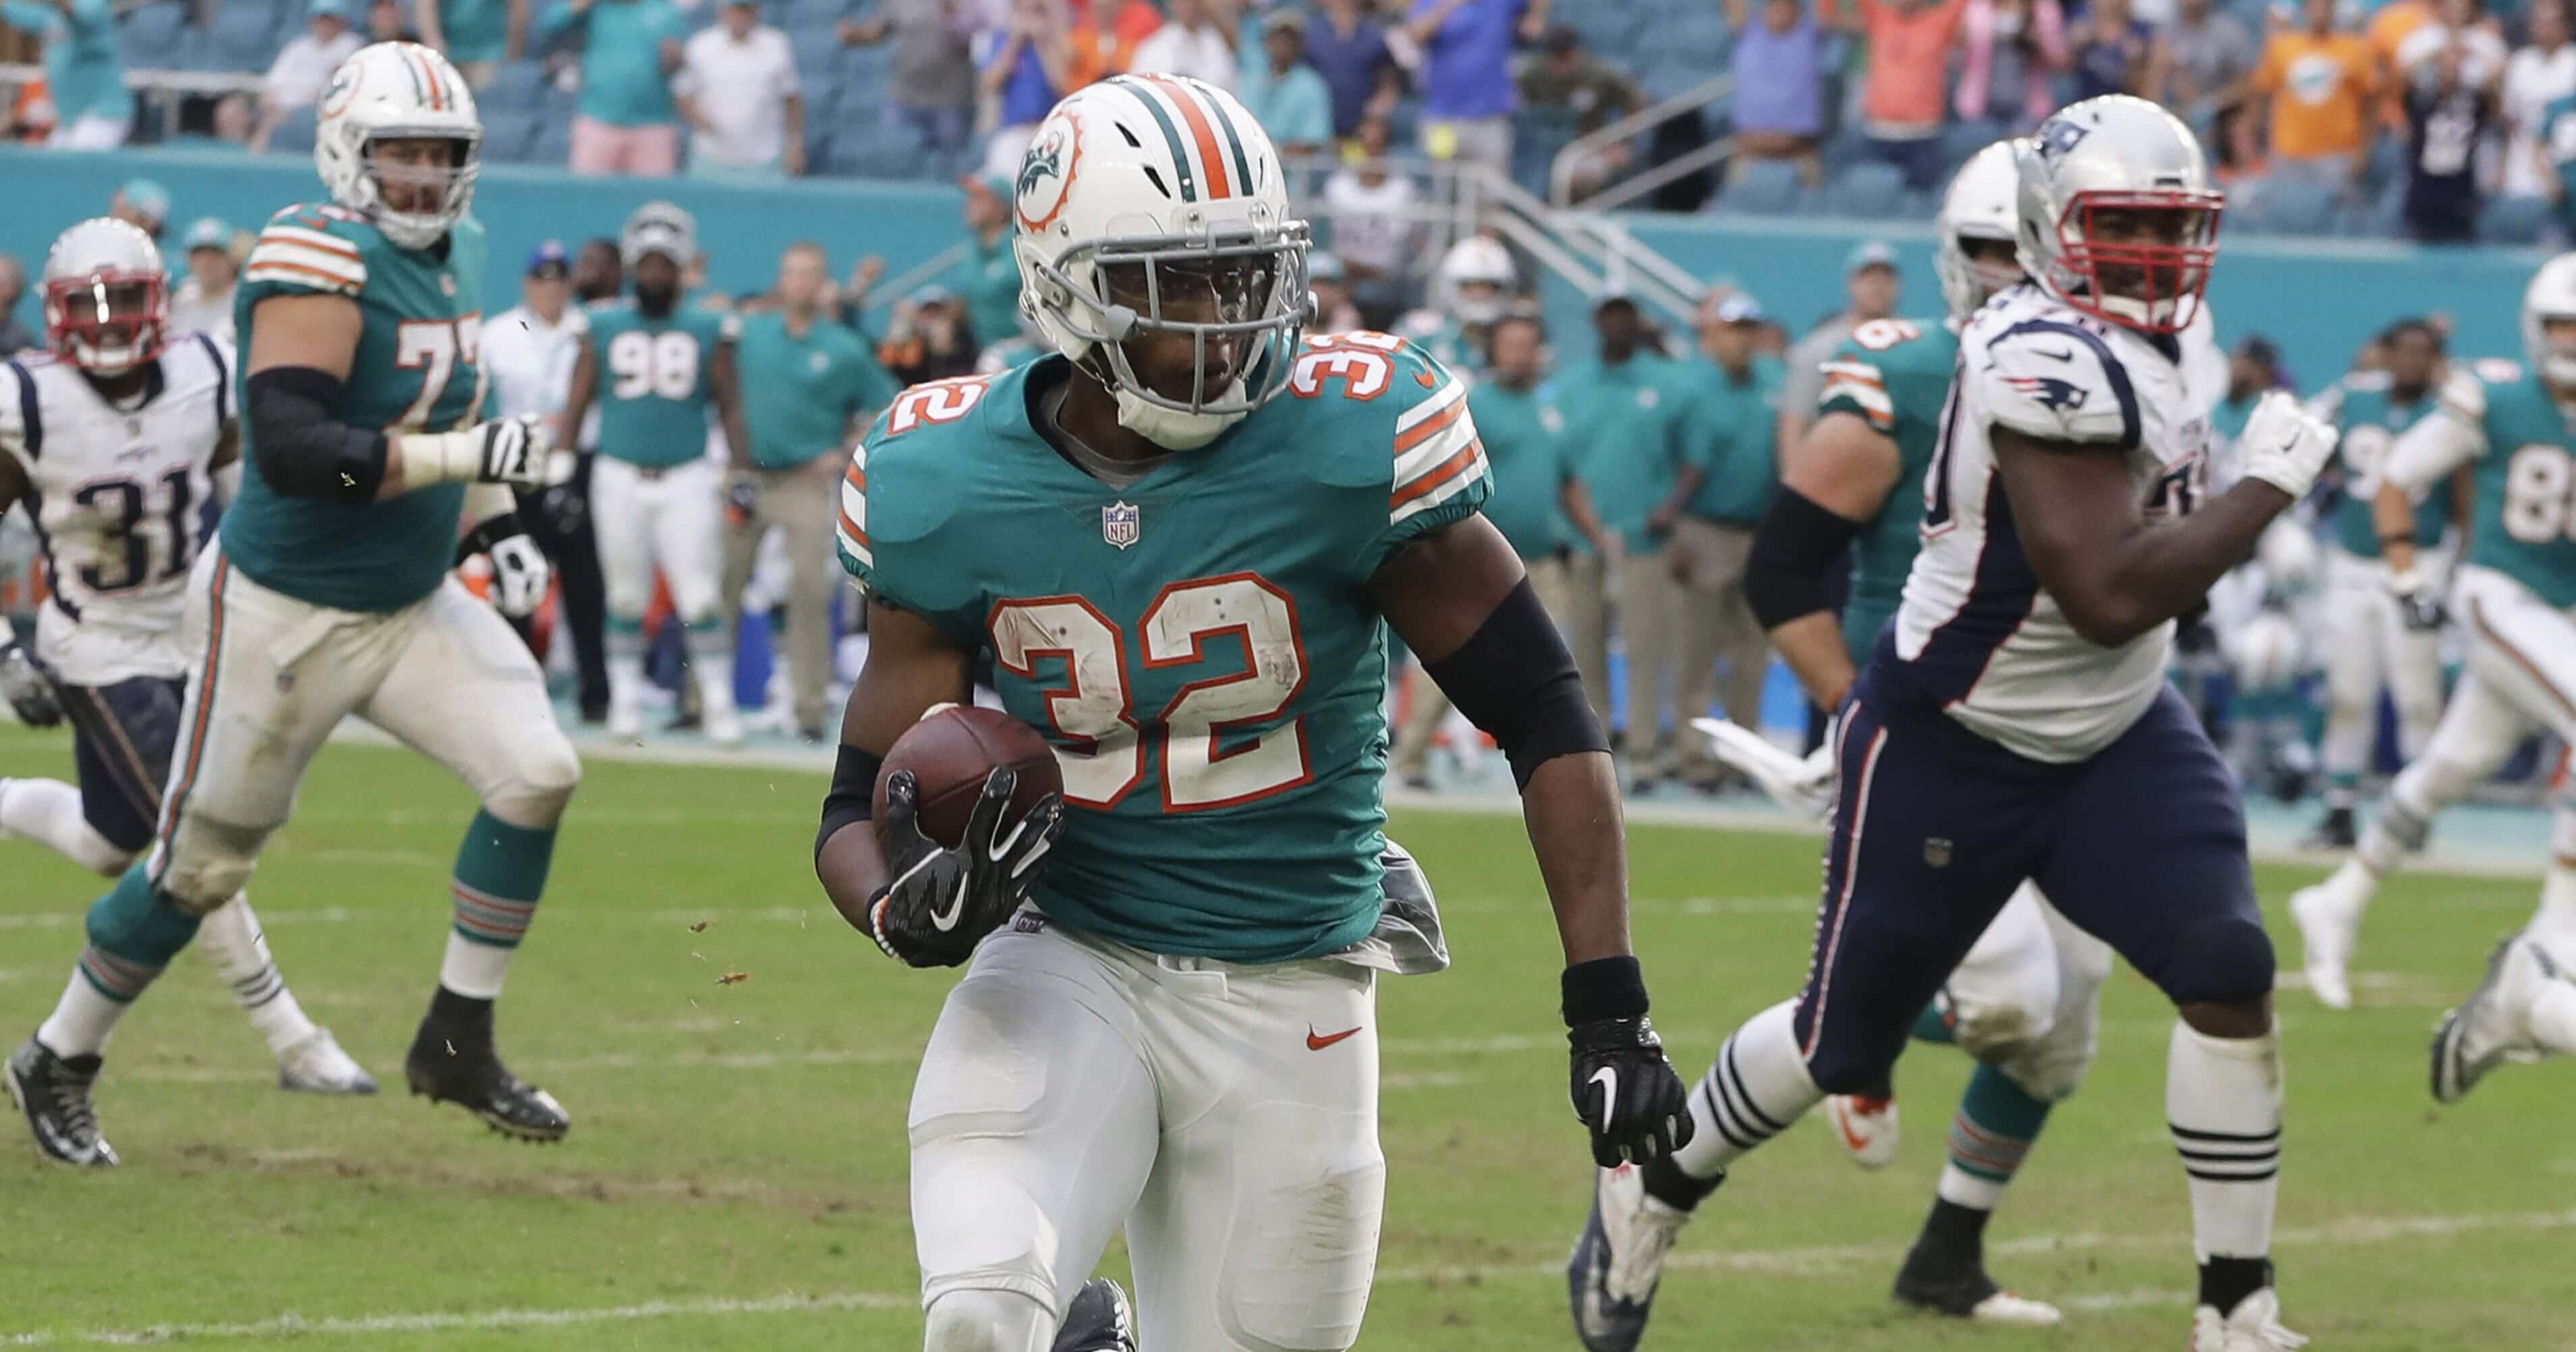 Miami Dolphins running back Kenyan Drake (32) runs for a touchdown in the final seconds to stun the New England Patriots on Sunday in Miami Gardens.